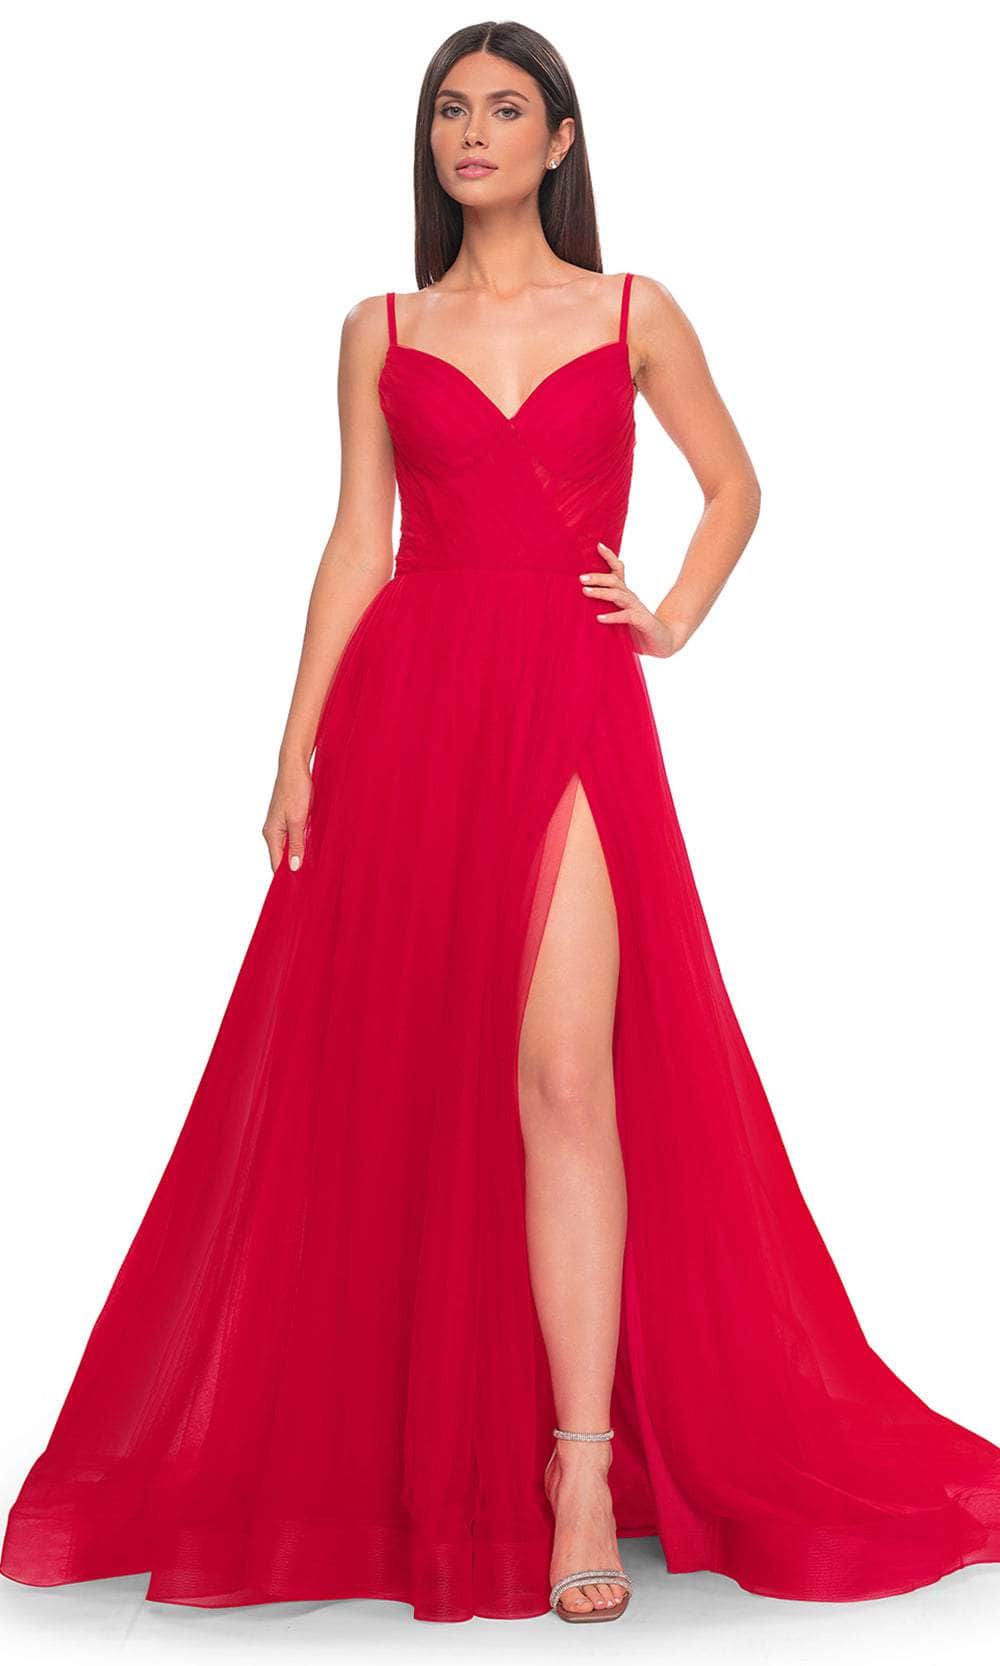 La Femme 32130 - Ruched Tulle Prom Dress Evening Dresses 00 /  Red